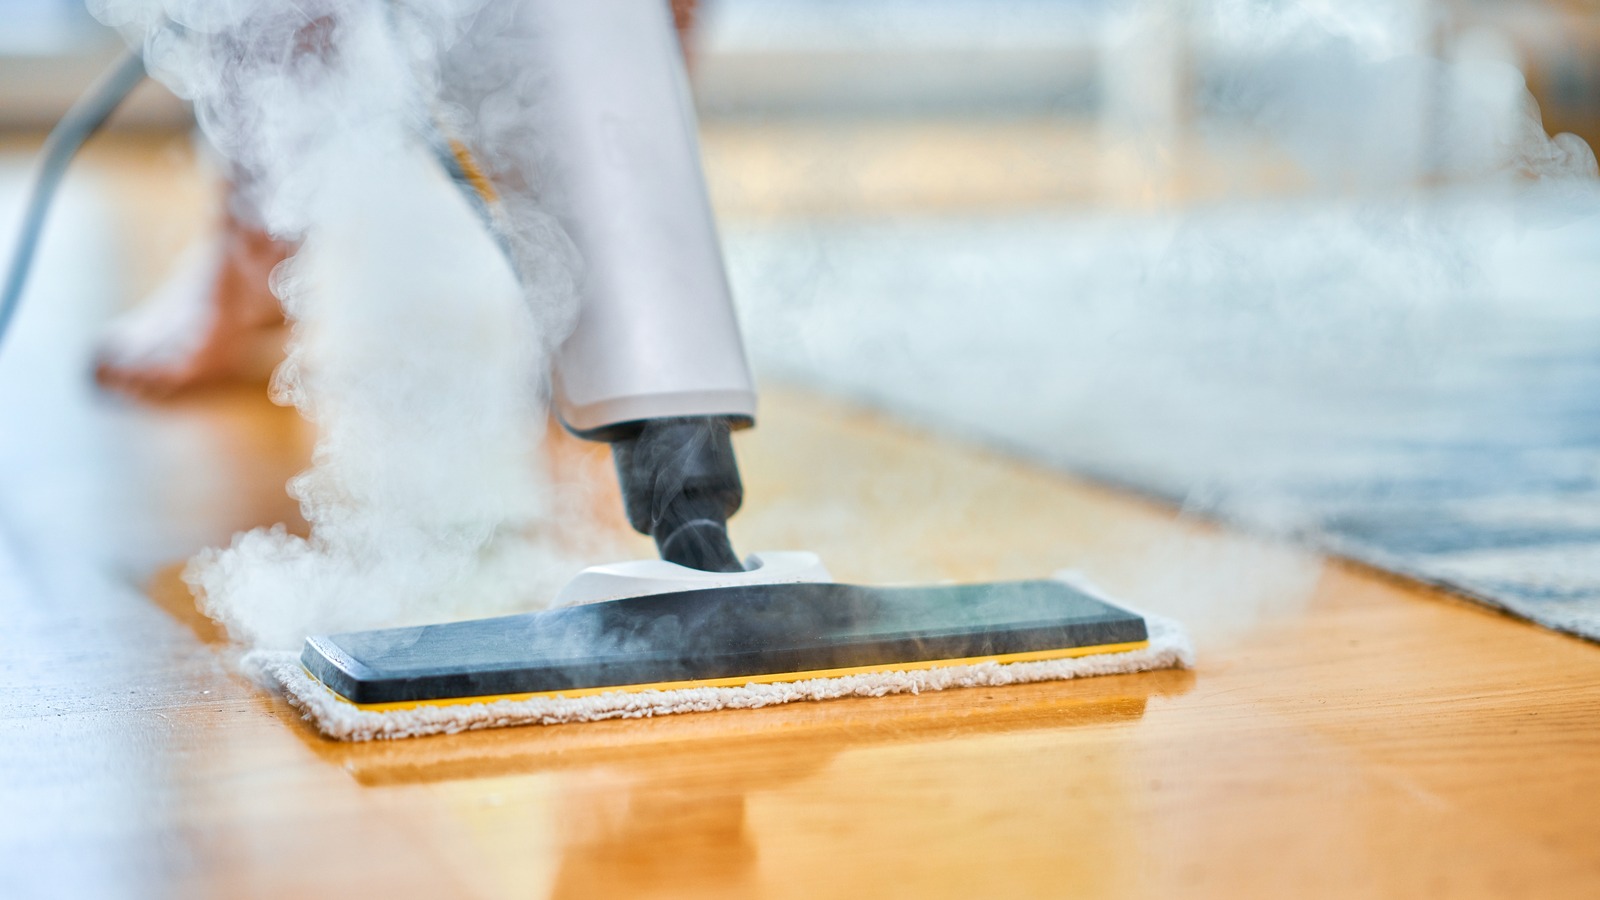 Did you know that it's totally safe to steam clean your suede/leather , steam cleaner